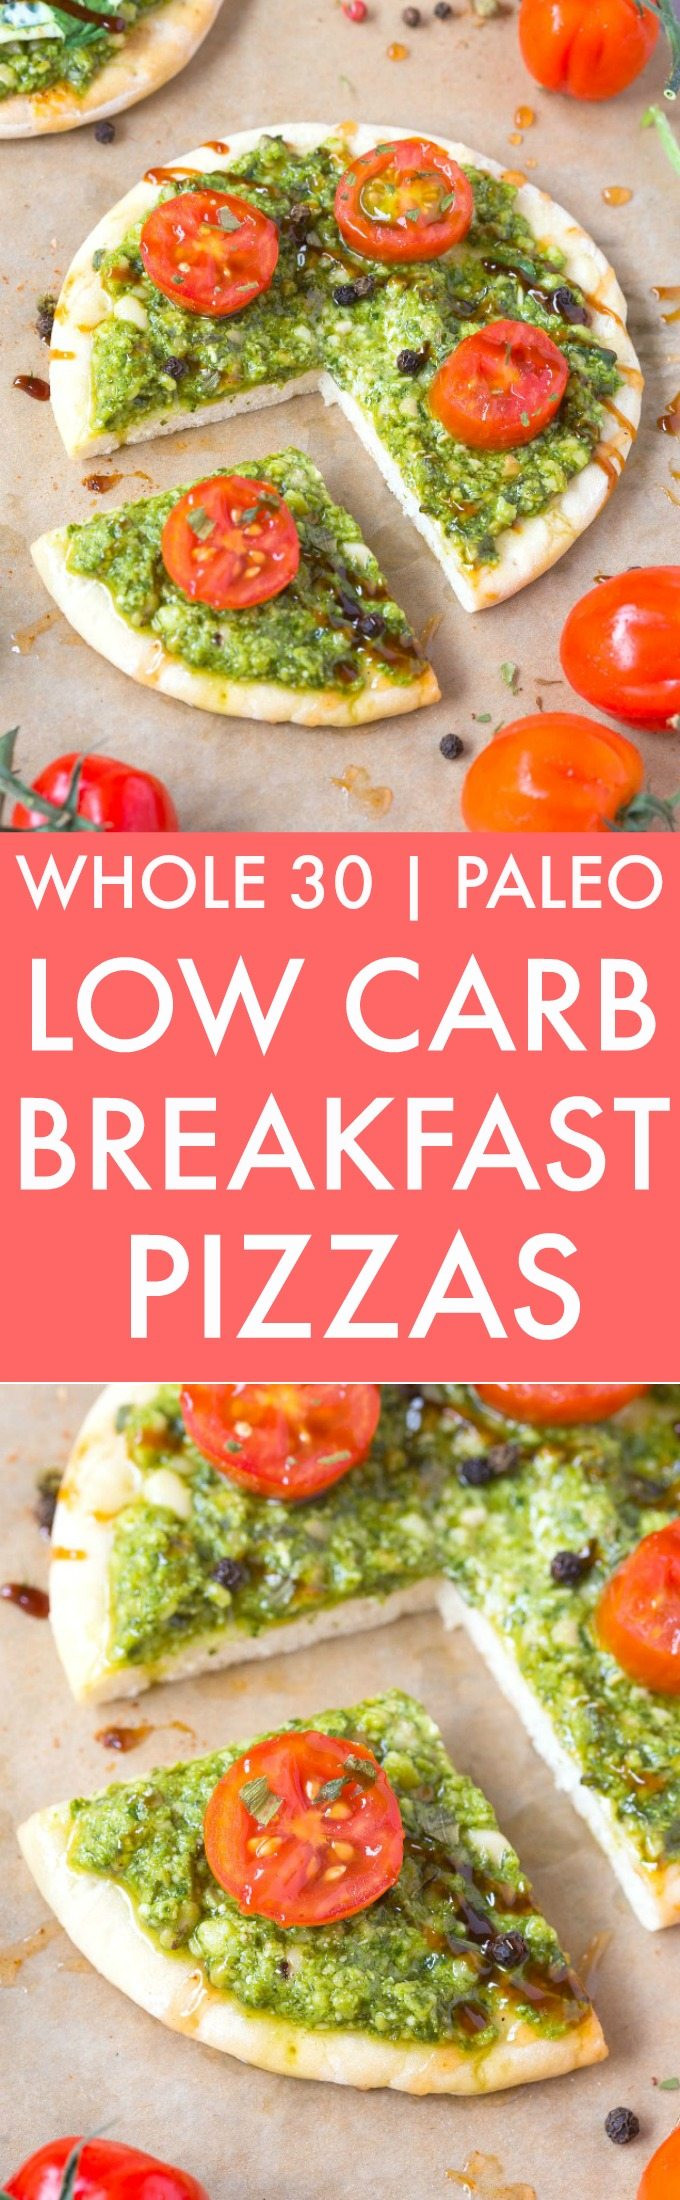 Low Carb Breakfast Pizza
 Healthy Low Carb Breakfast Pizza Paleo Gluten Free